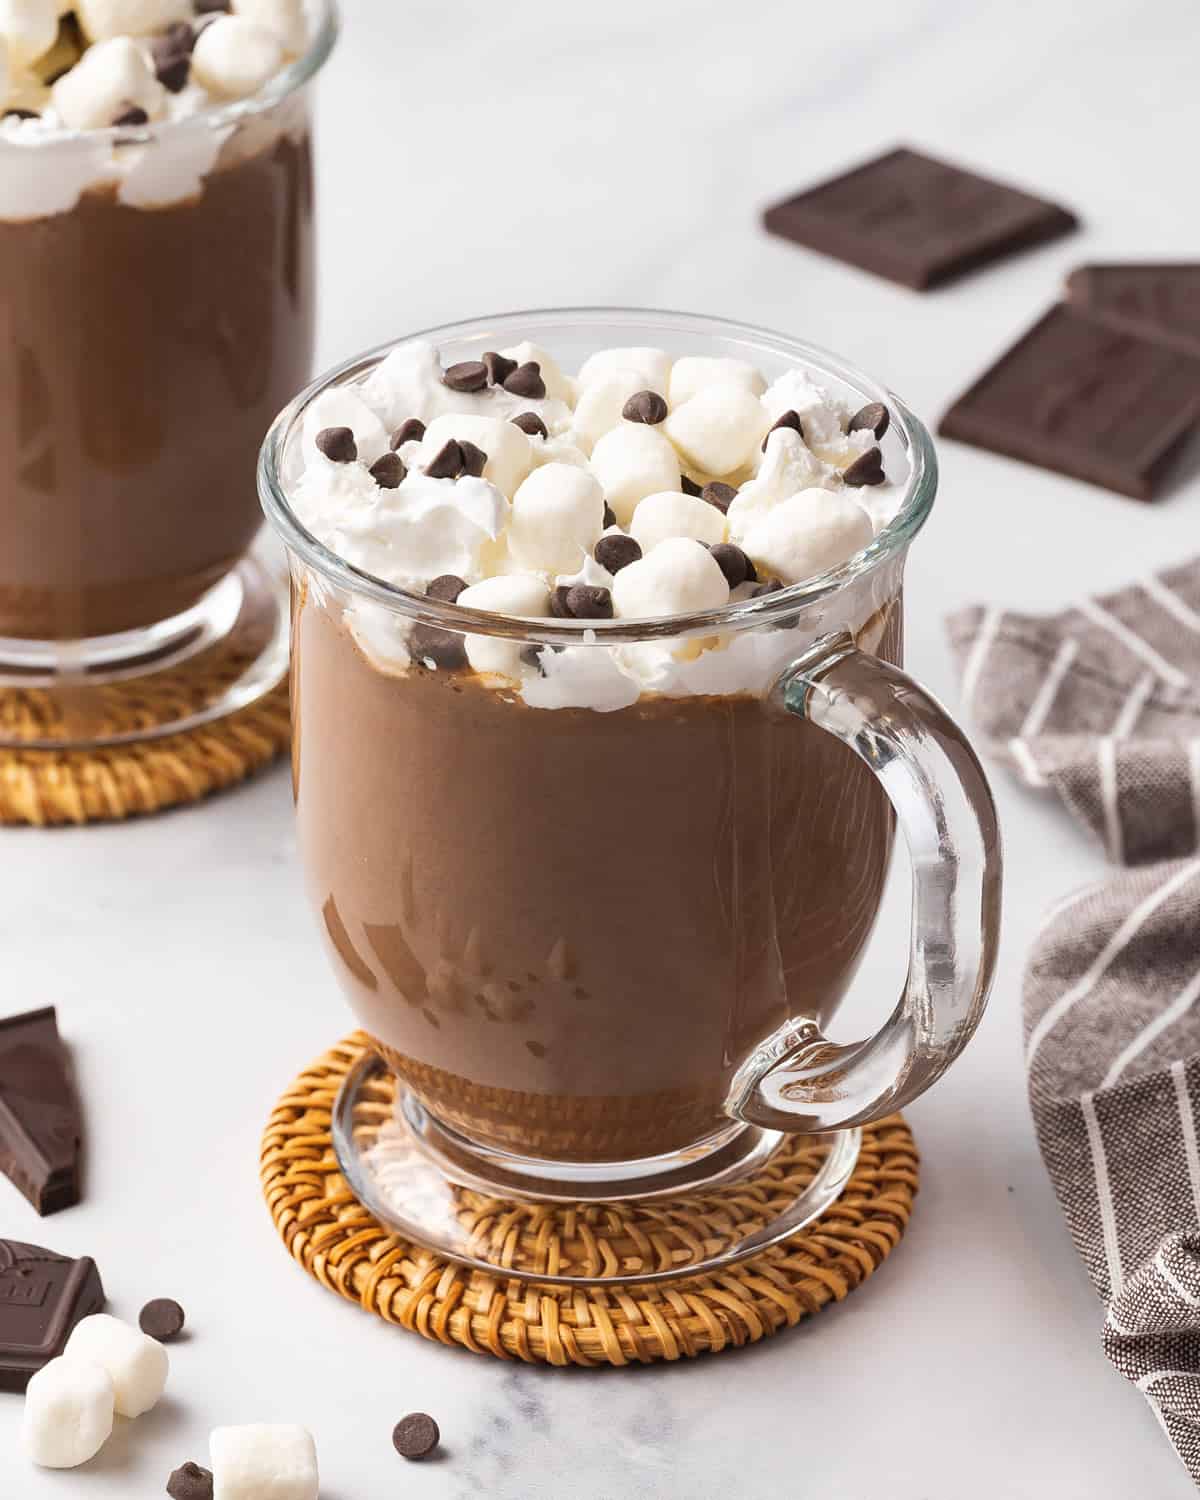 A mug of crockpot hot chocolate with whipped cream, marshmallows, and chocolate chips.